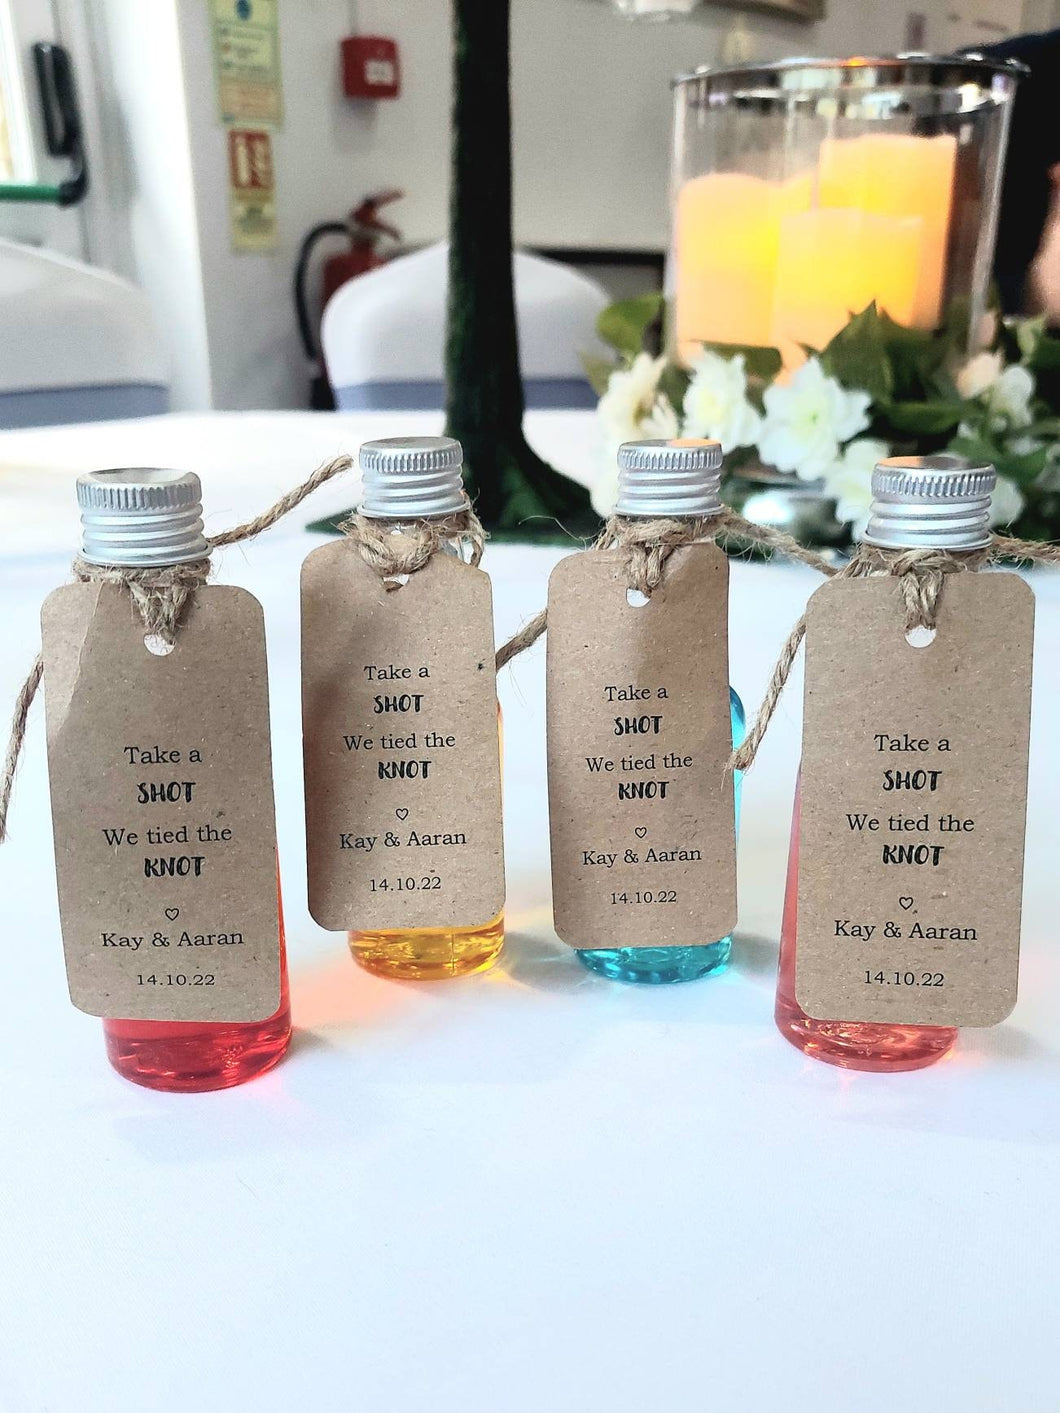 Personalised take a shot tags we tied the knot, Wedding drink favours, favor tags, drink tags for parties, anniversary, engagement, signs